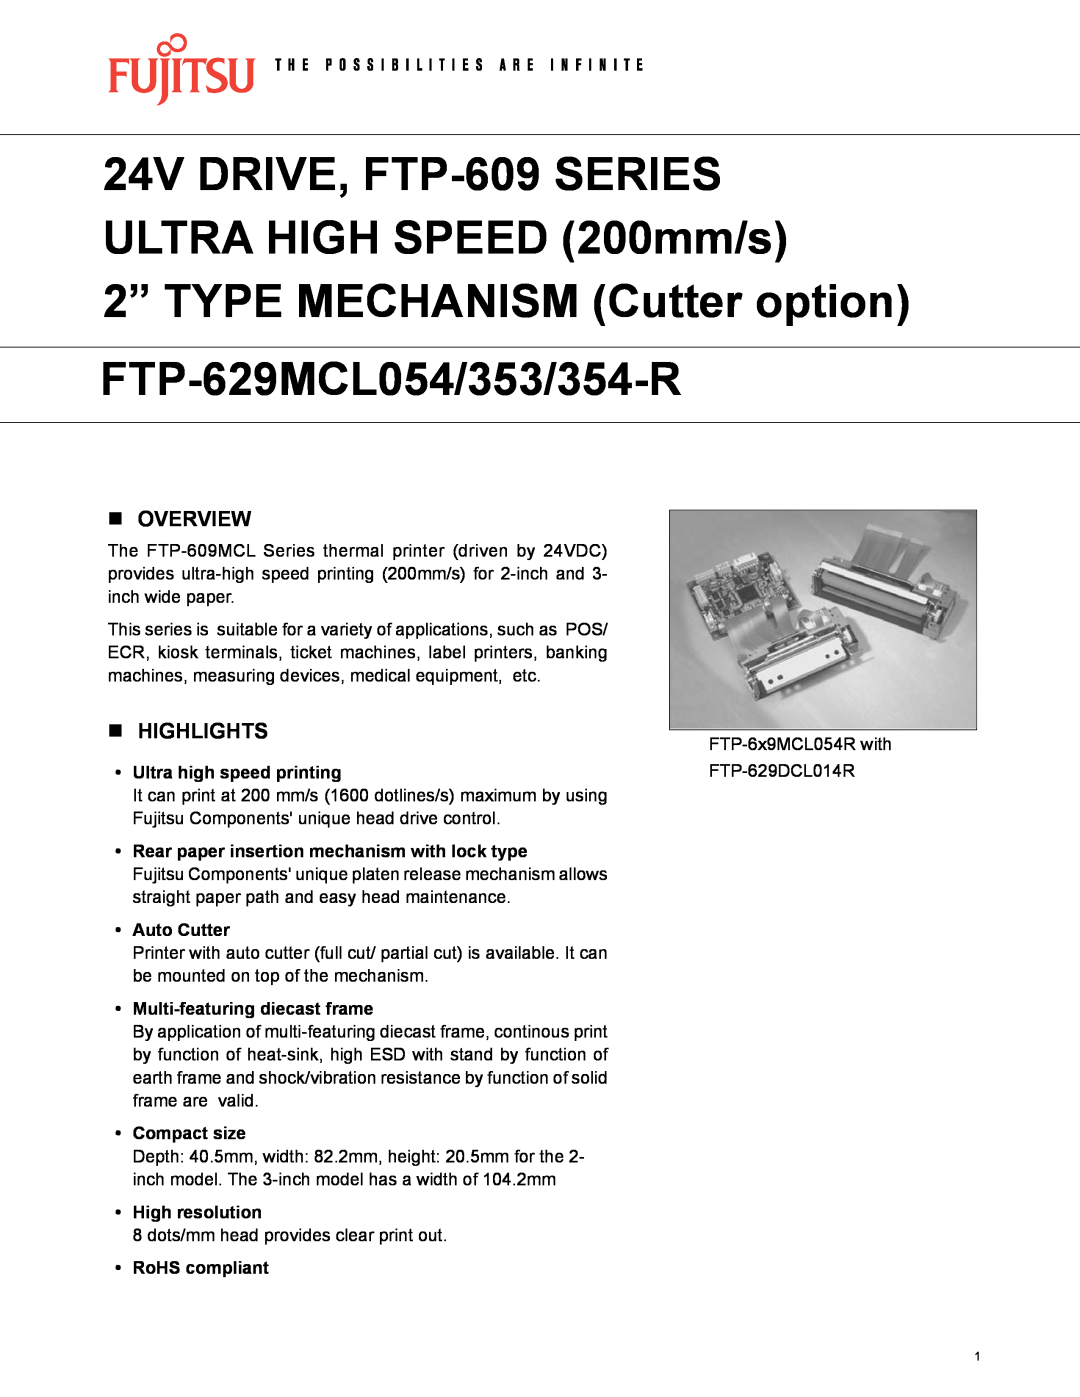 Fujitsu FTP-629MCL054 manual n Overview, n HIGHLIGHTS, 24V DRIVE, FTP-609 Series Ultra high speed 200mm/s, Auto Cutter 